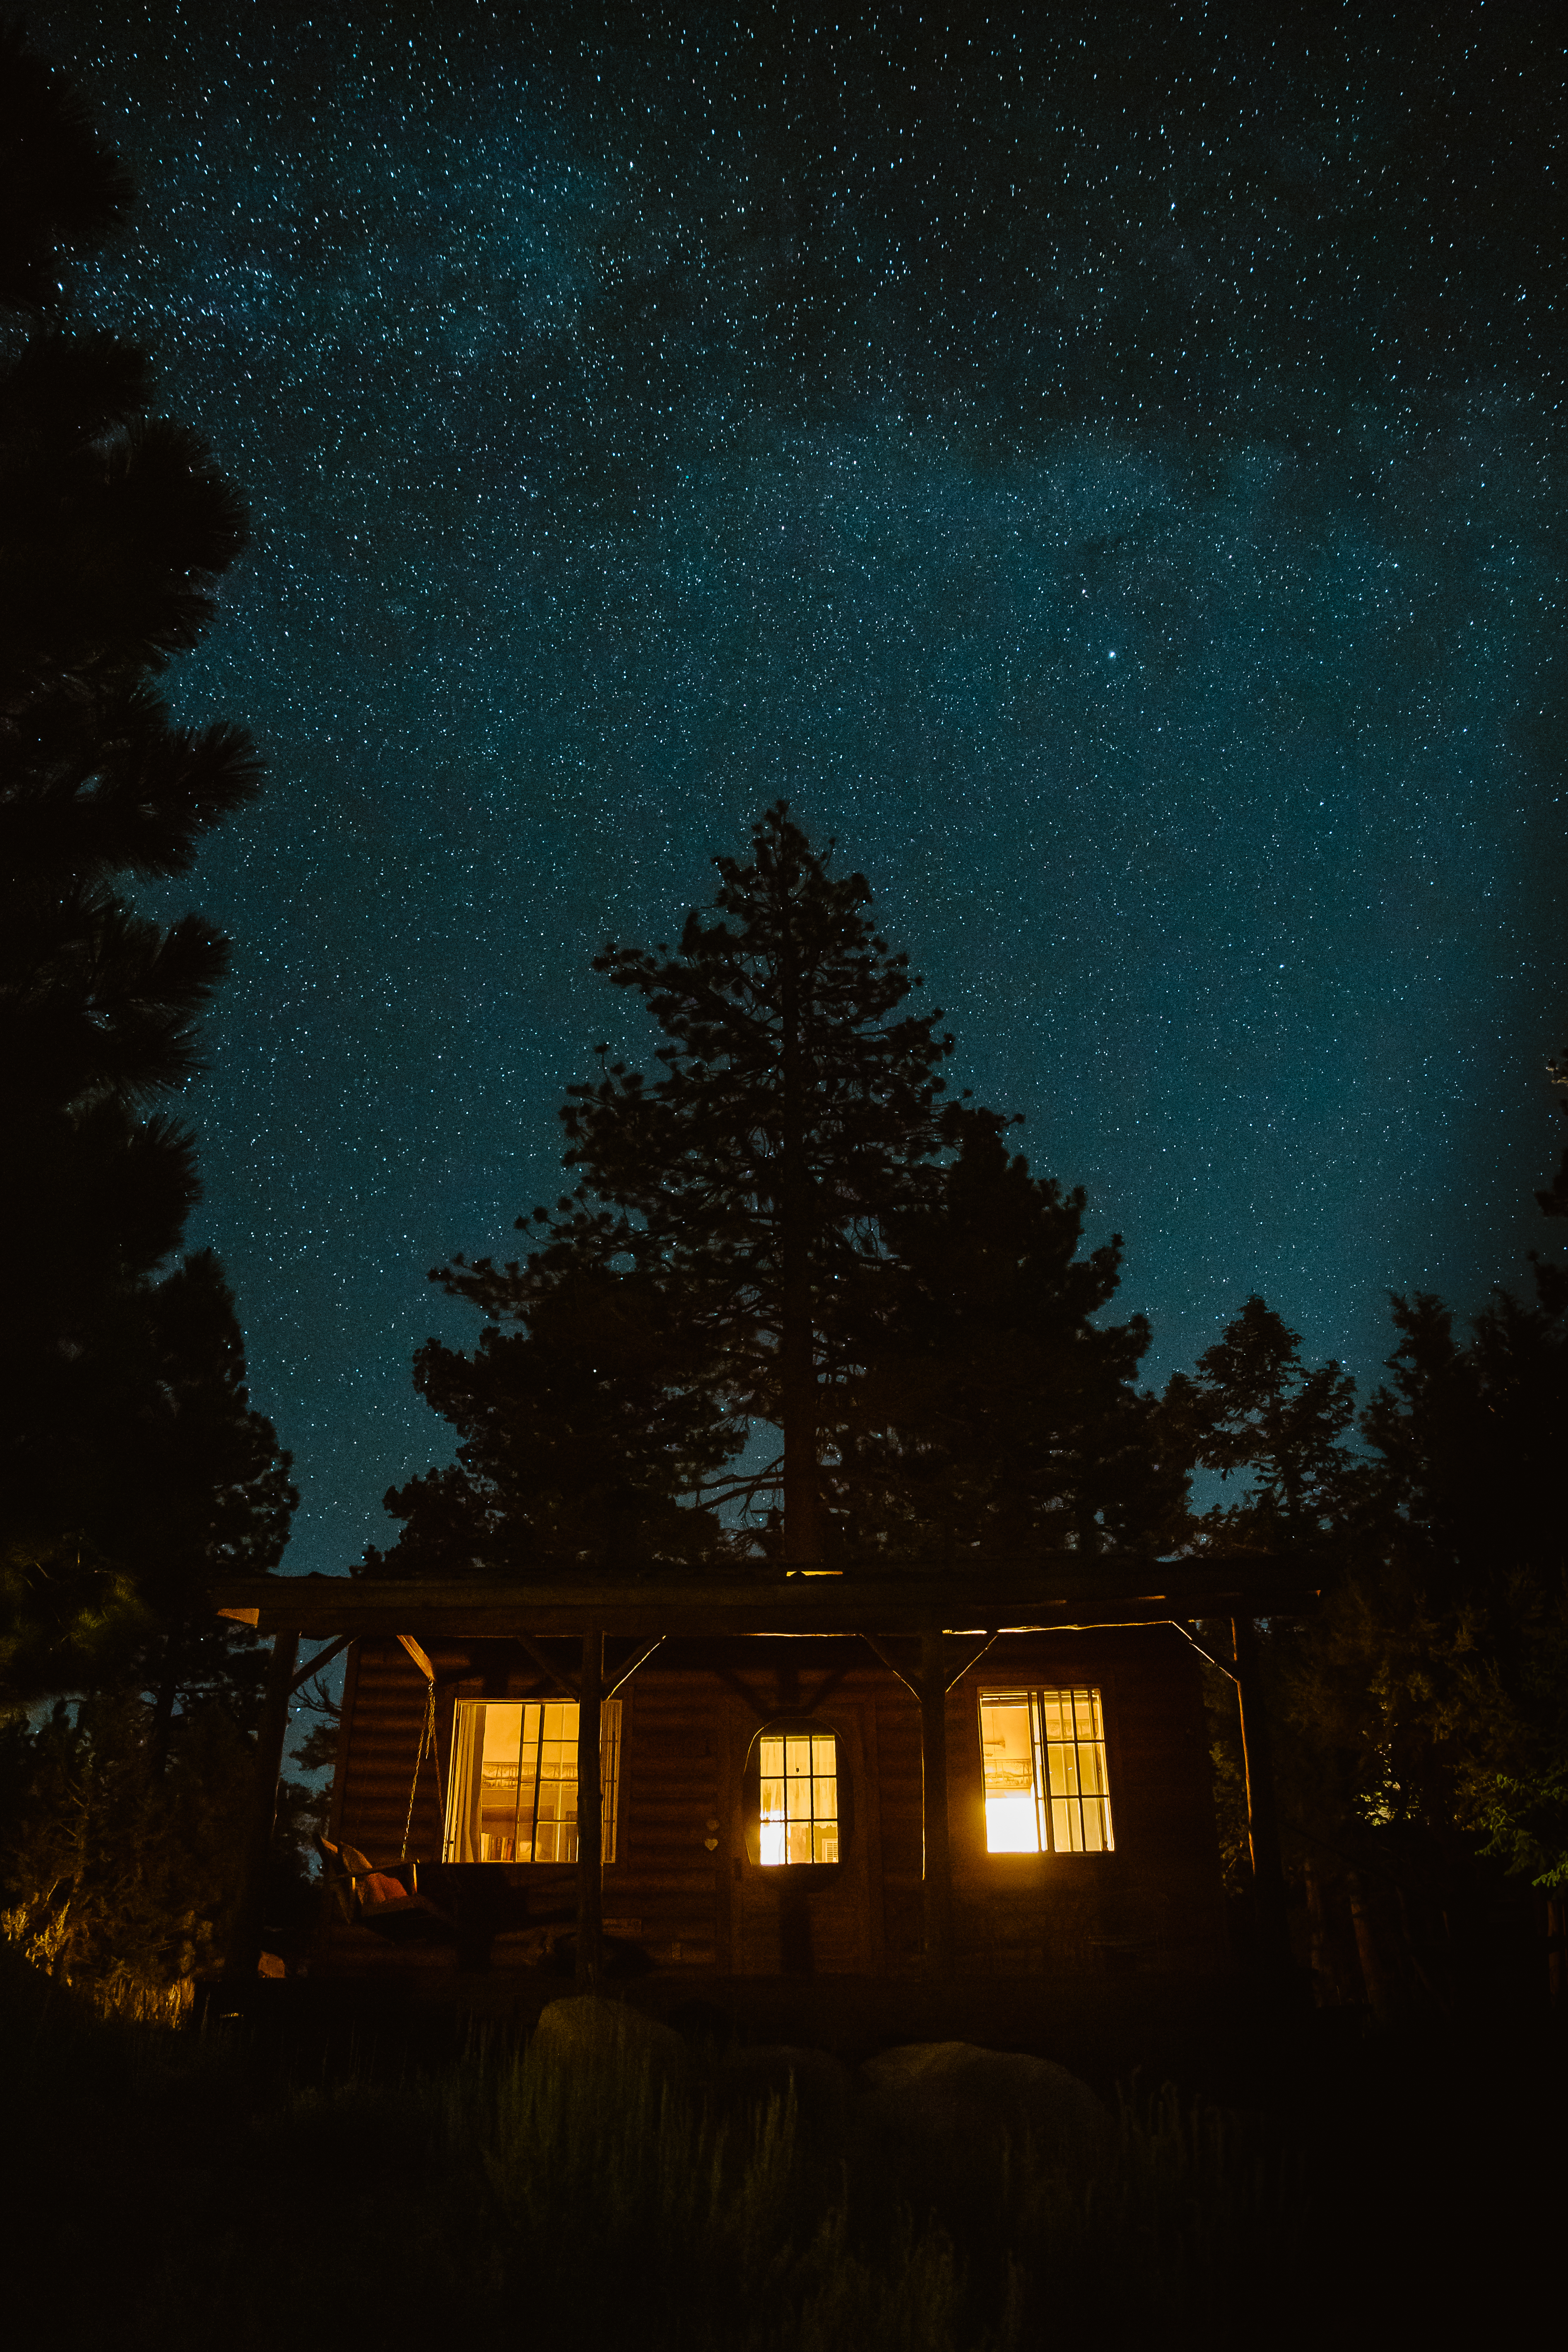 Cabin in the woods with night sky and stars